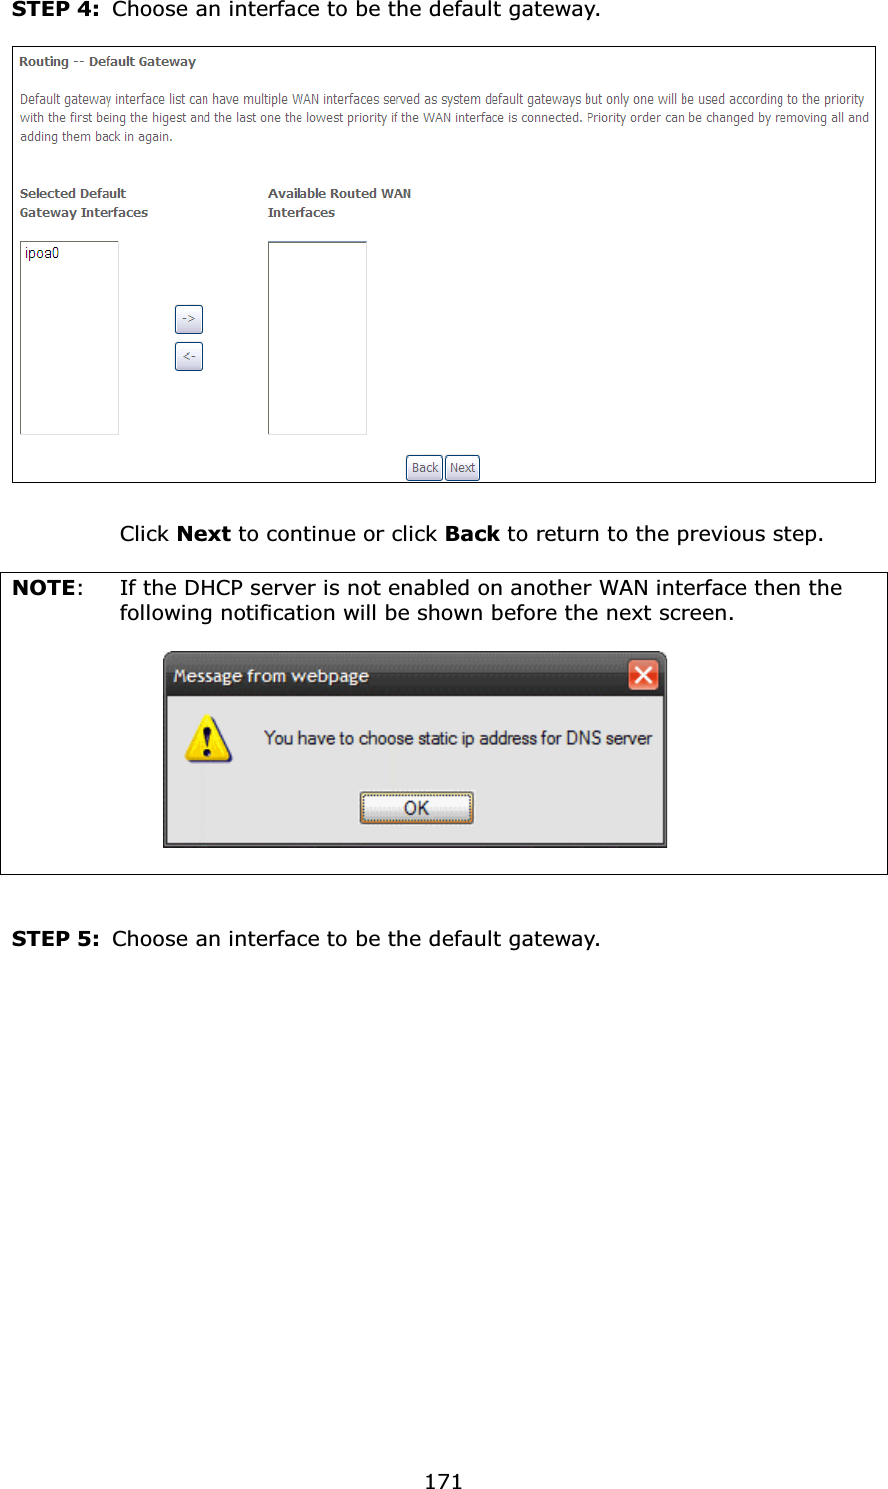 171STEP 4: Choose an interface to be the default gateway.Click Next to continue or click Back to return to the previous step.NOTE: If the DHCP server is not enabled on another WAN interface then the following notification will be shown before the next screen. STEP 5: Choose an interface to be the default gateway.